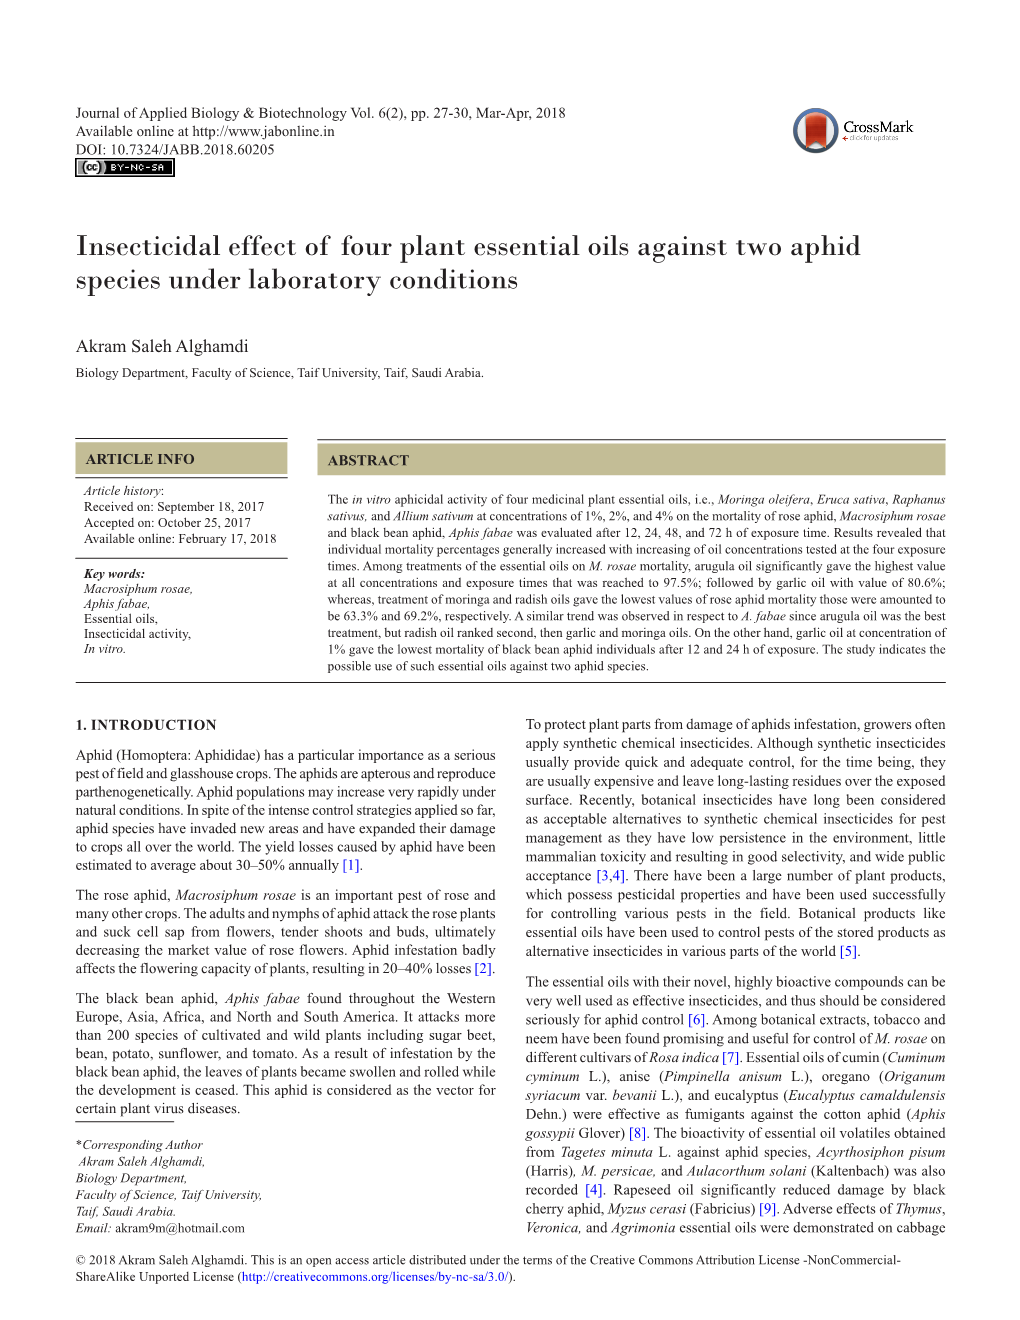 Insecticidal Effect of Four Plant Essential Oils Against Two Aphid Species Under Laboratory Conditions